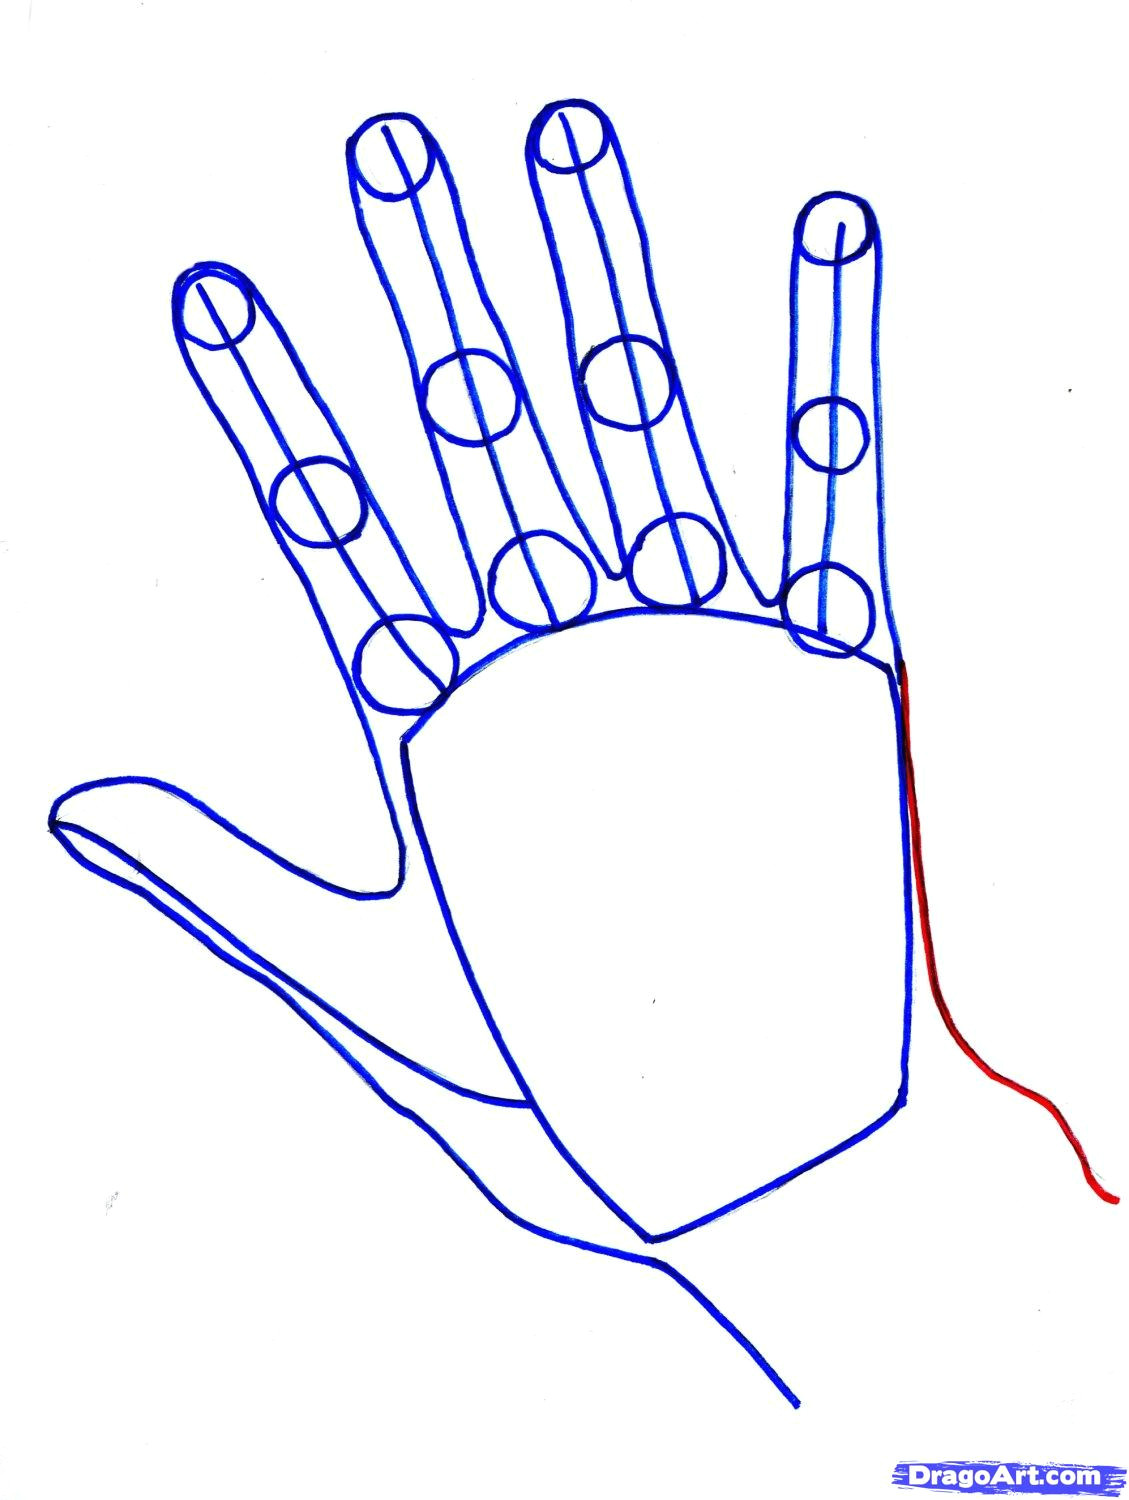 Drawing Of A Hands Step by Step How to Draw Hands